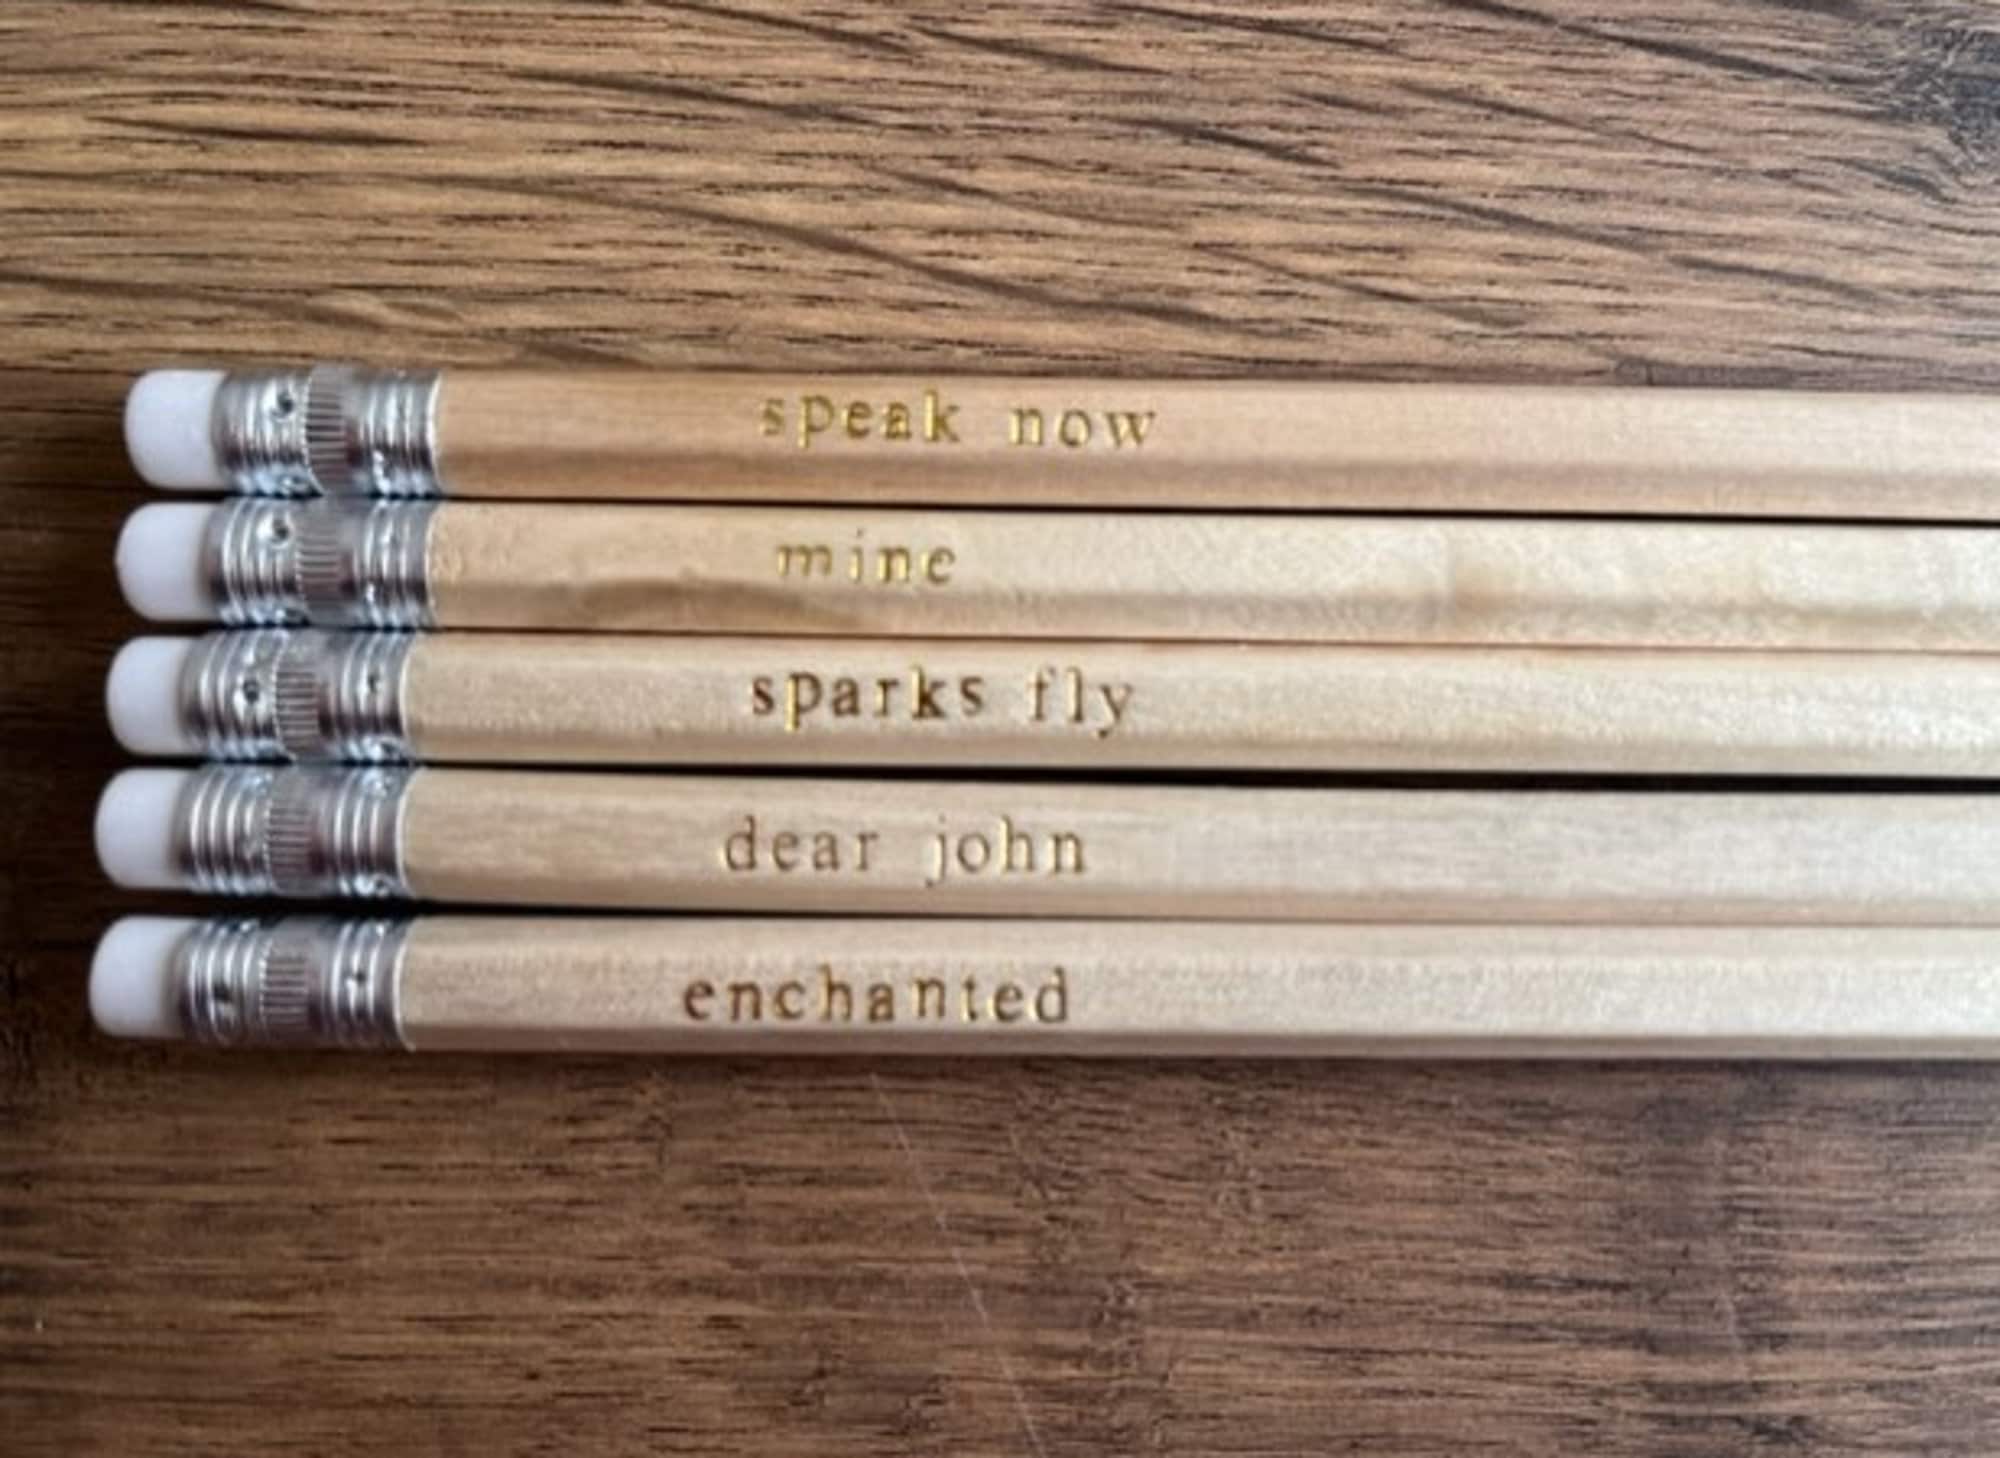 Taylor Swift Pencils - Customised Premium Natural Wood Pencils Featuring  1989 Song Titles